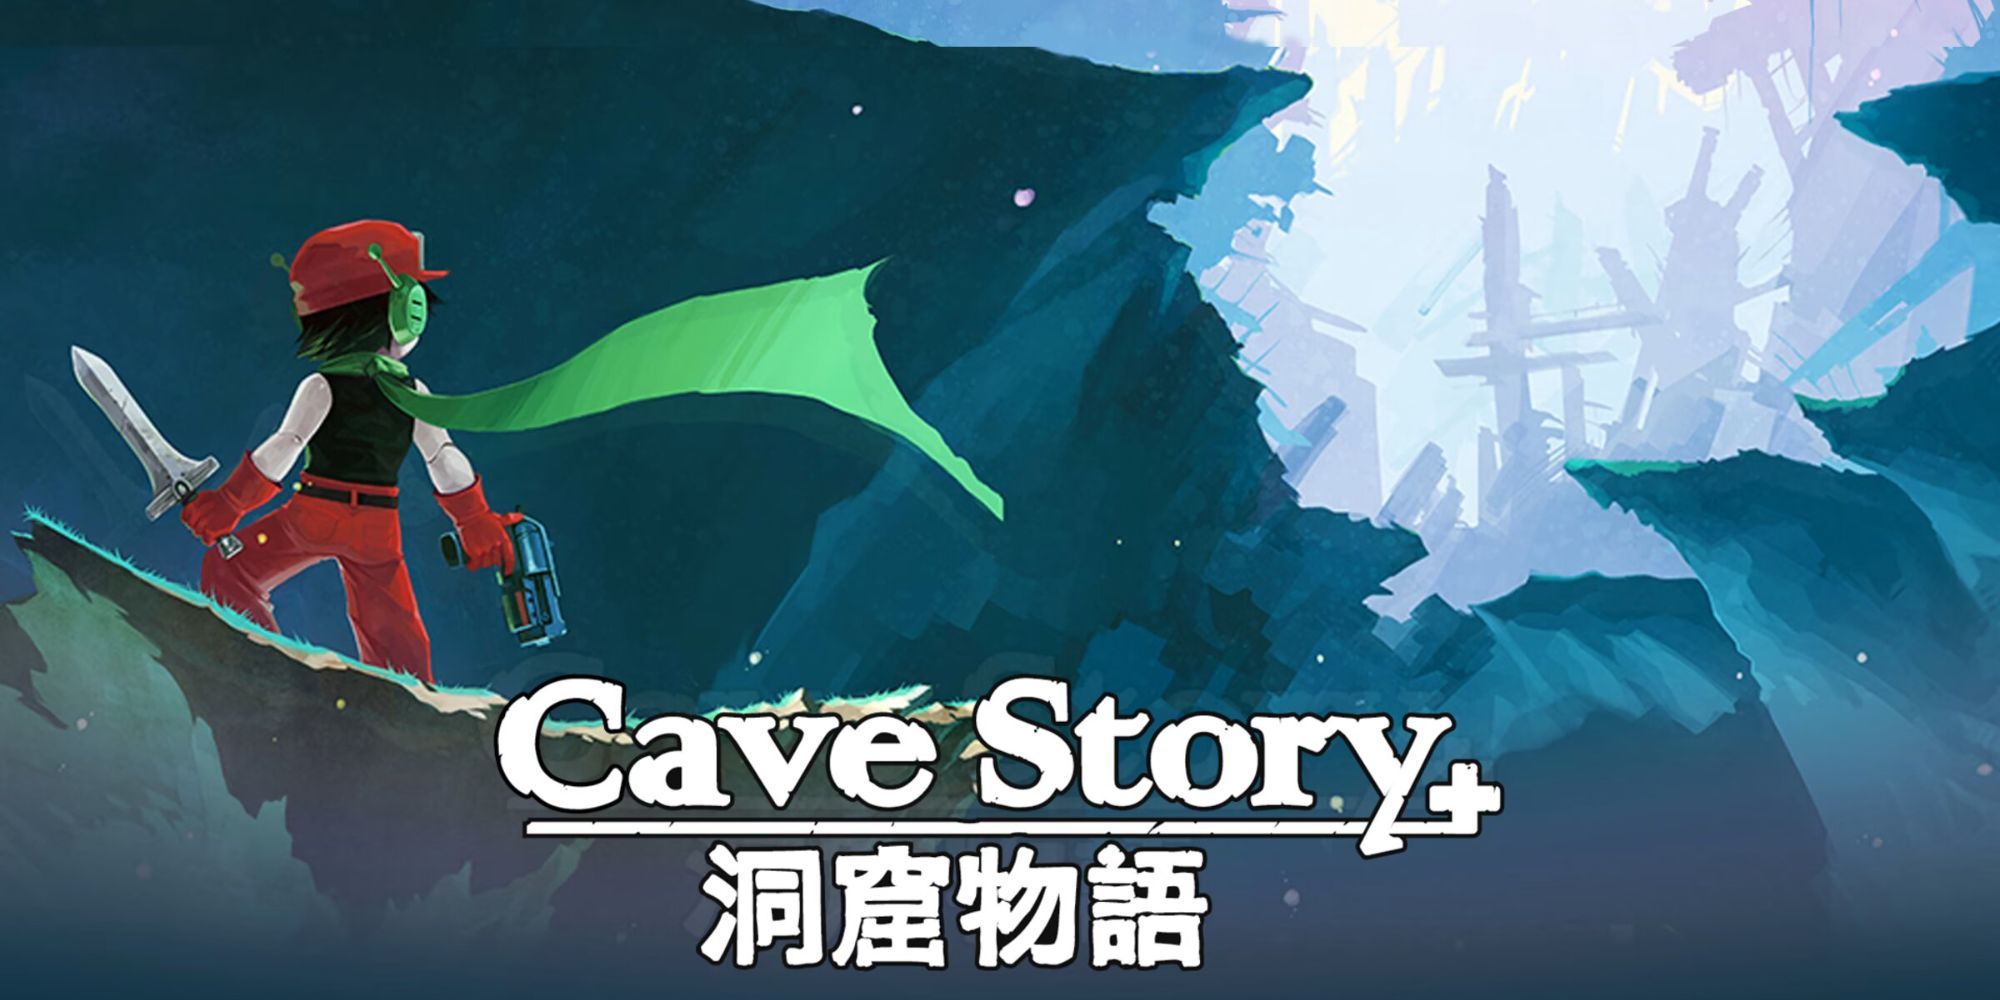 A boy stands of a cliff with a sword looking to a rocky passage in Cave Story promotional art